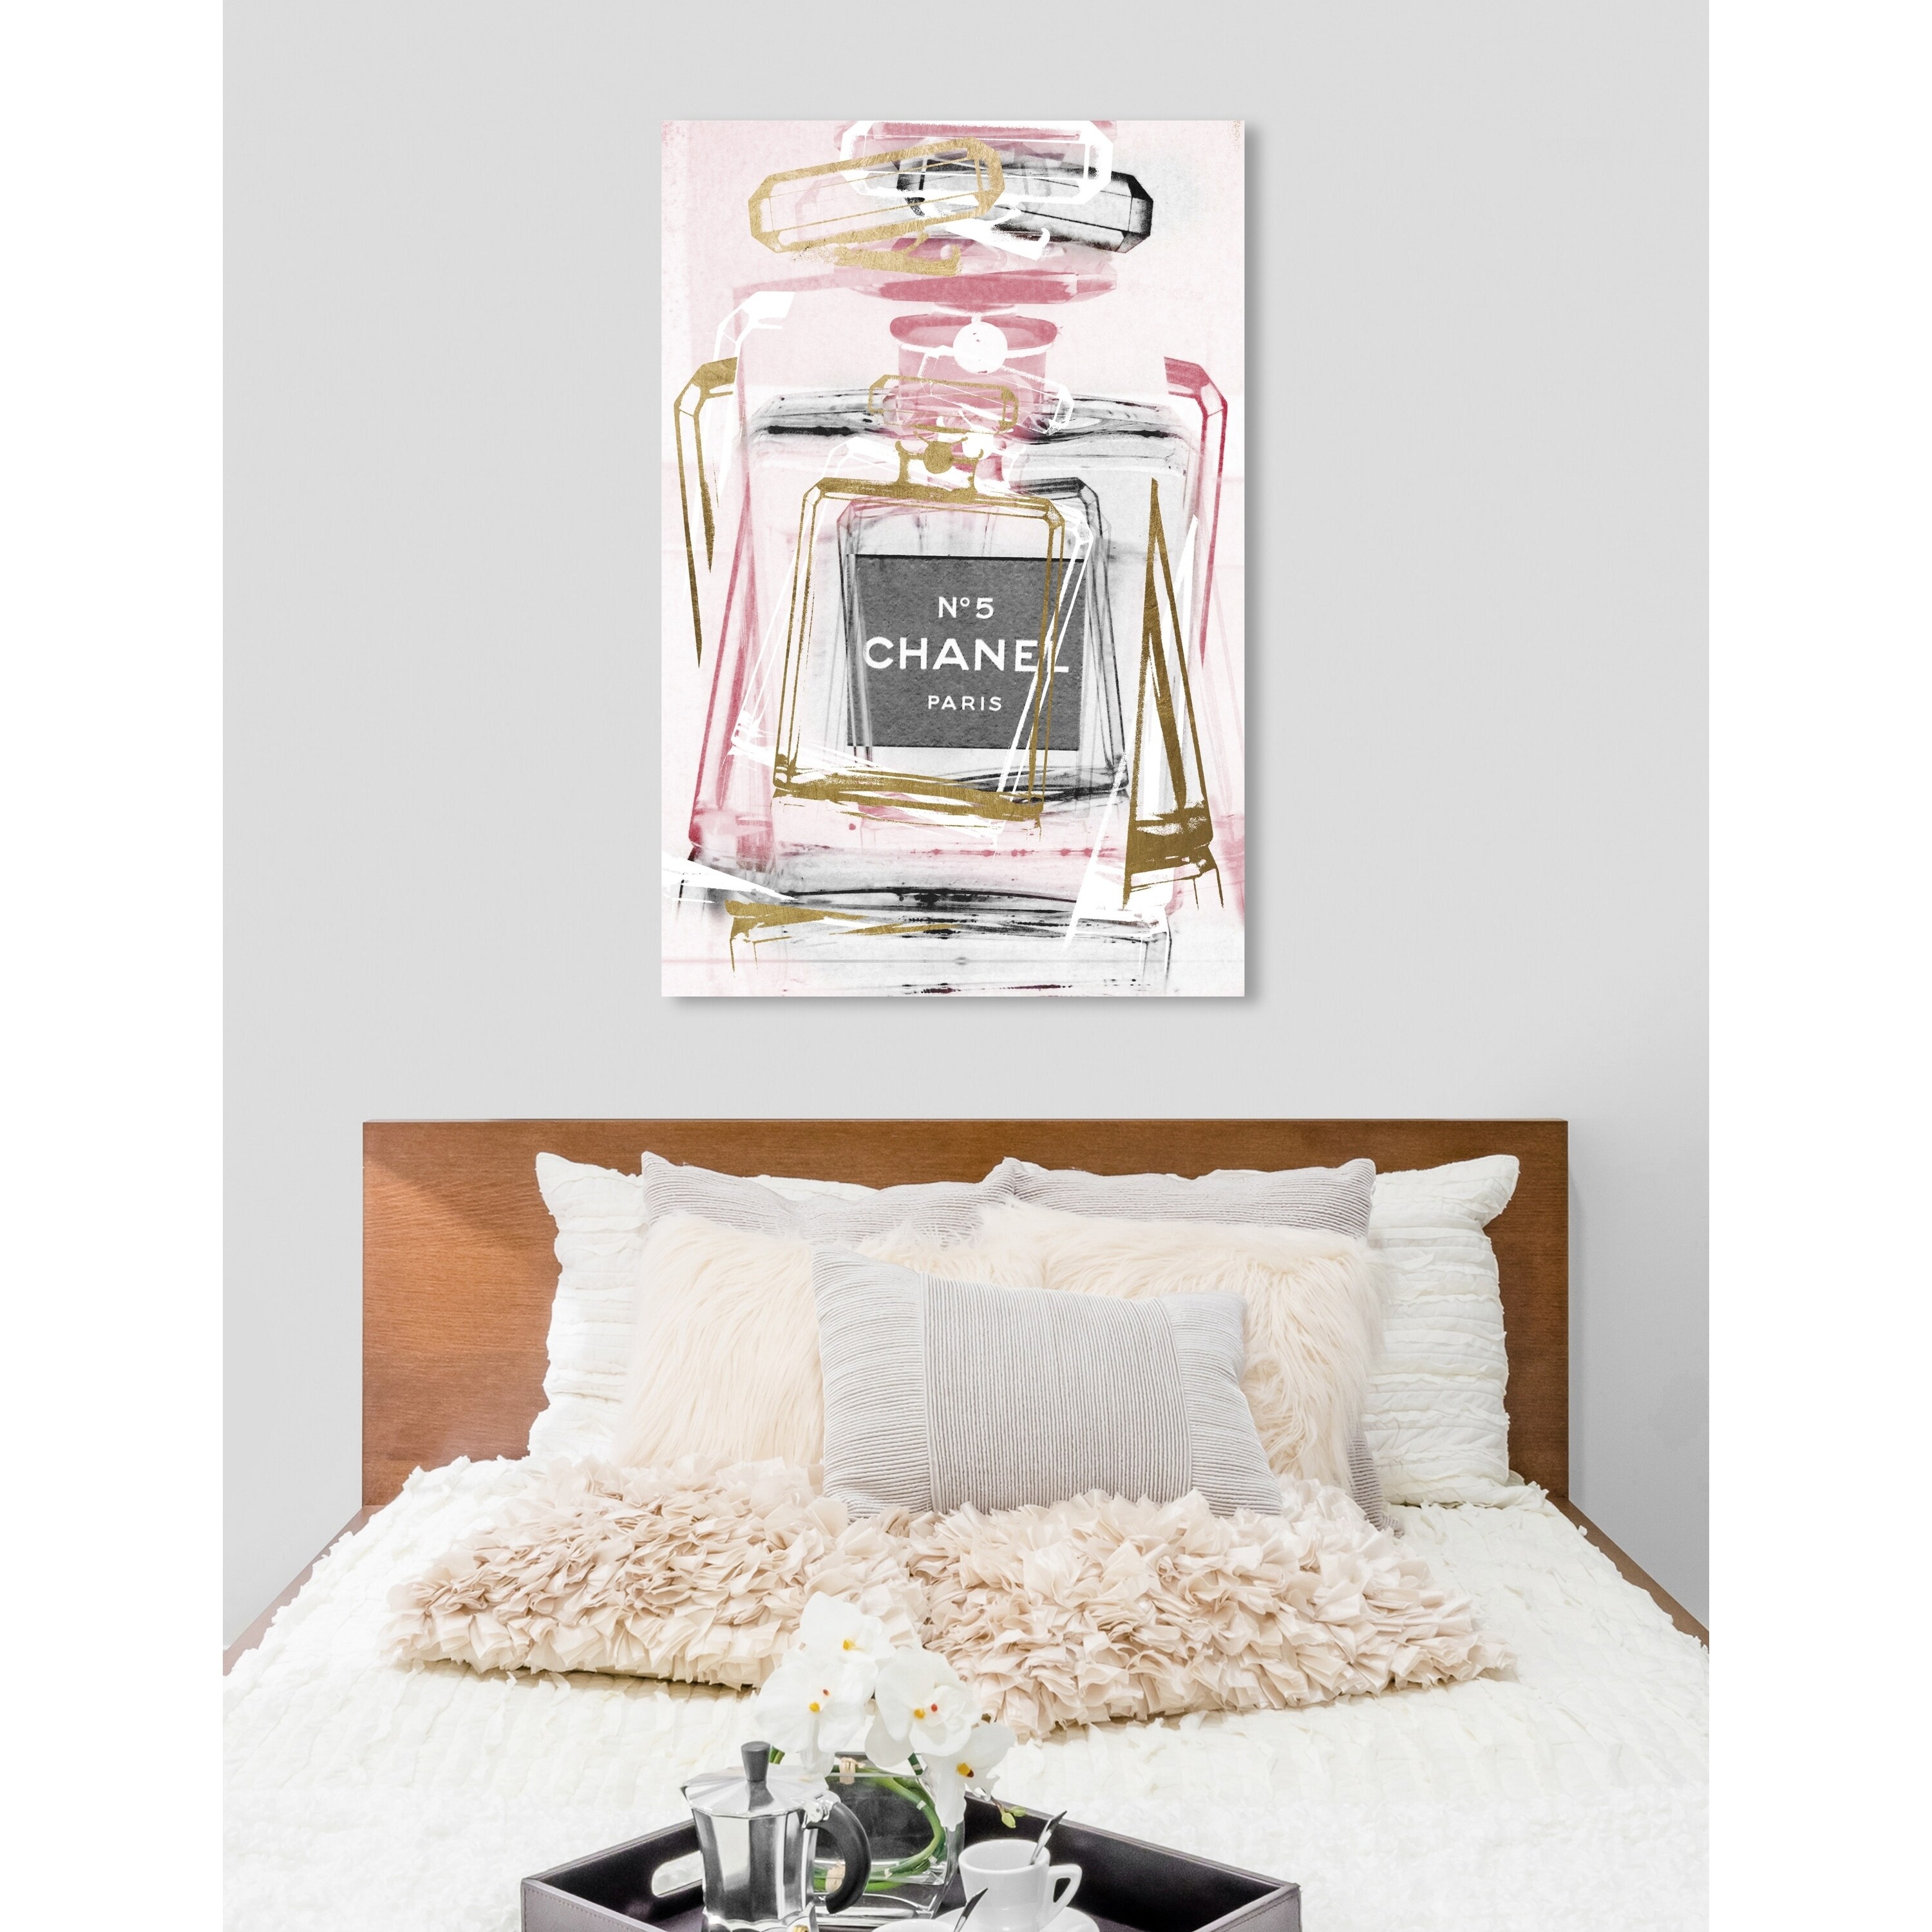 Shop Oliver Gal Infinite Glam Blush Fashion And Glam Wall Art Canvas Print Pink Gold On Sale Overstock 18219354